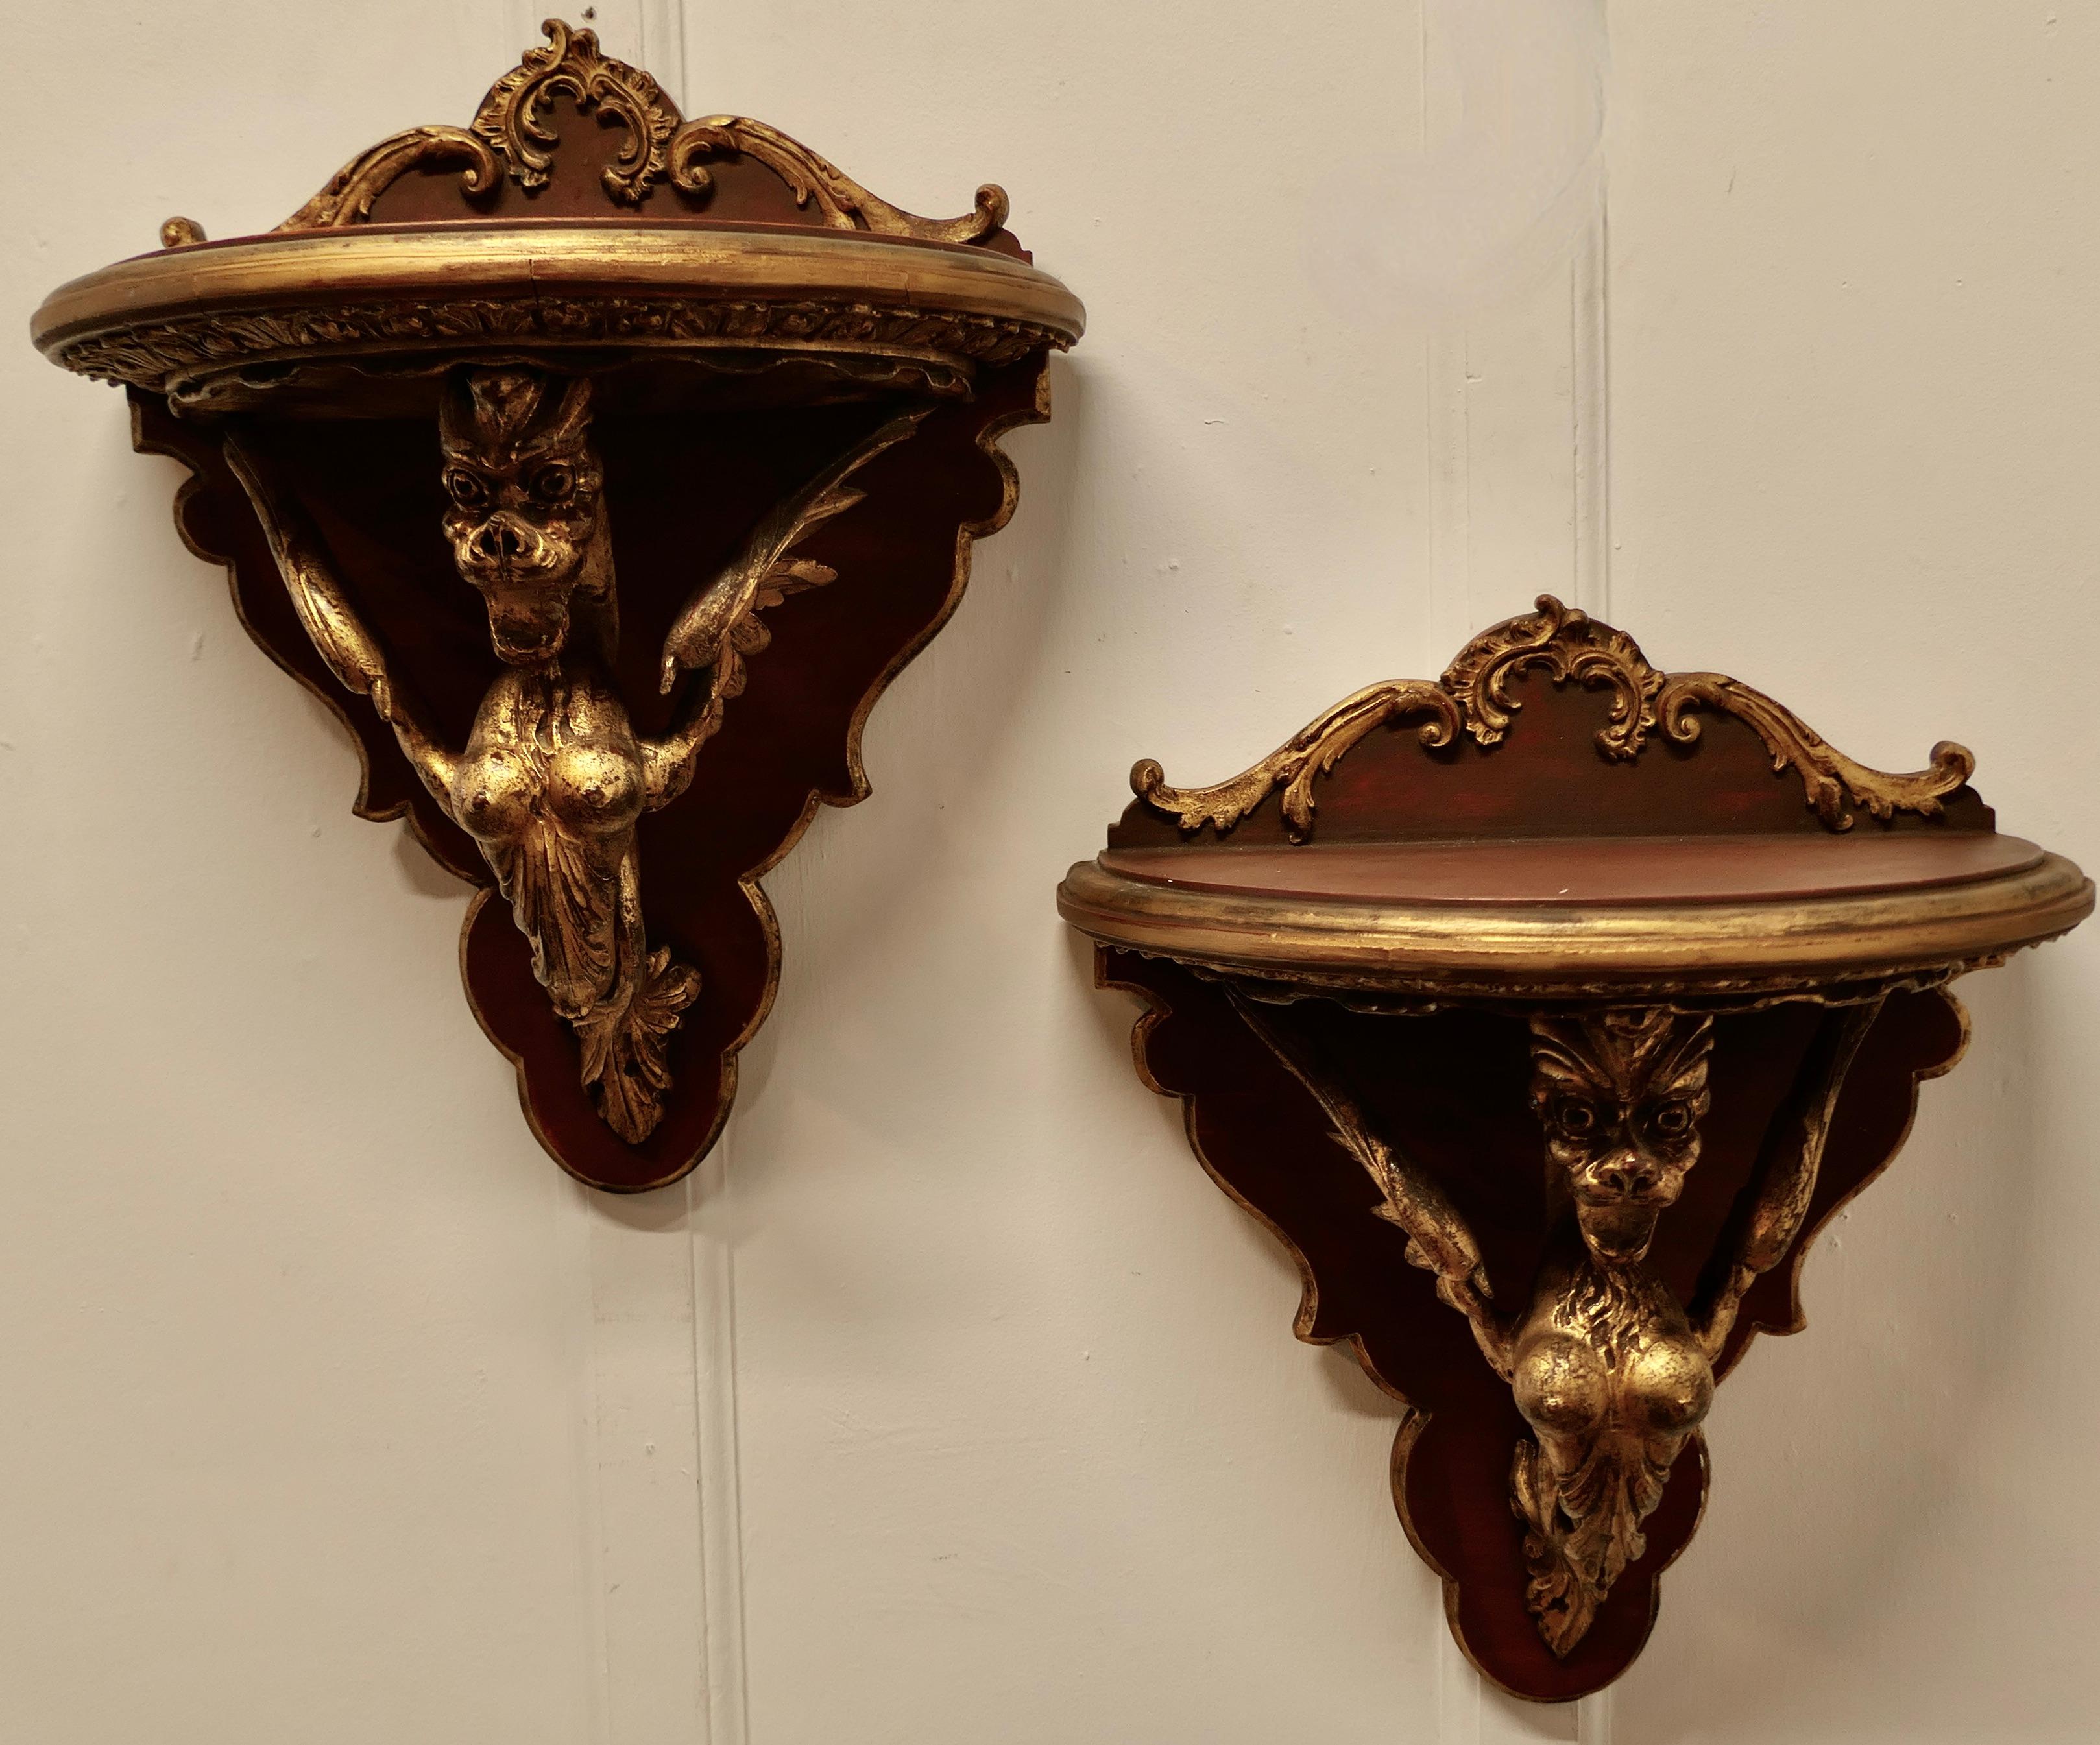 A Large Pair of Italian Carved Gilt Wall Brackets

These are a beautifully carved pair, Winged Griffins with breasts, piercing expression in their eyes and scroll feet supporting large Demi-lune wall brackets
There are superb pieces in good